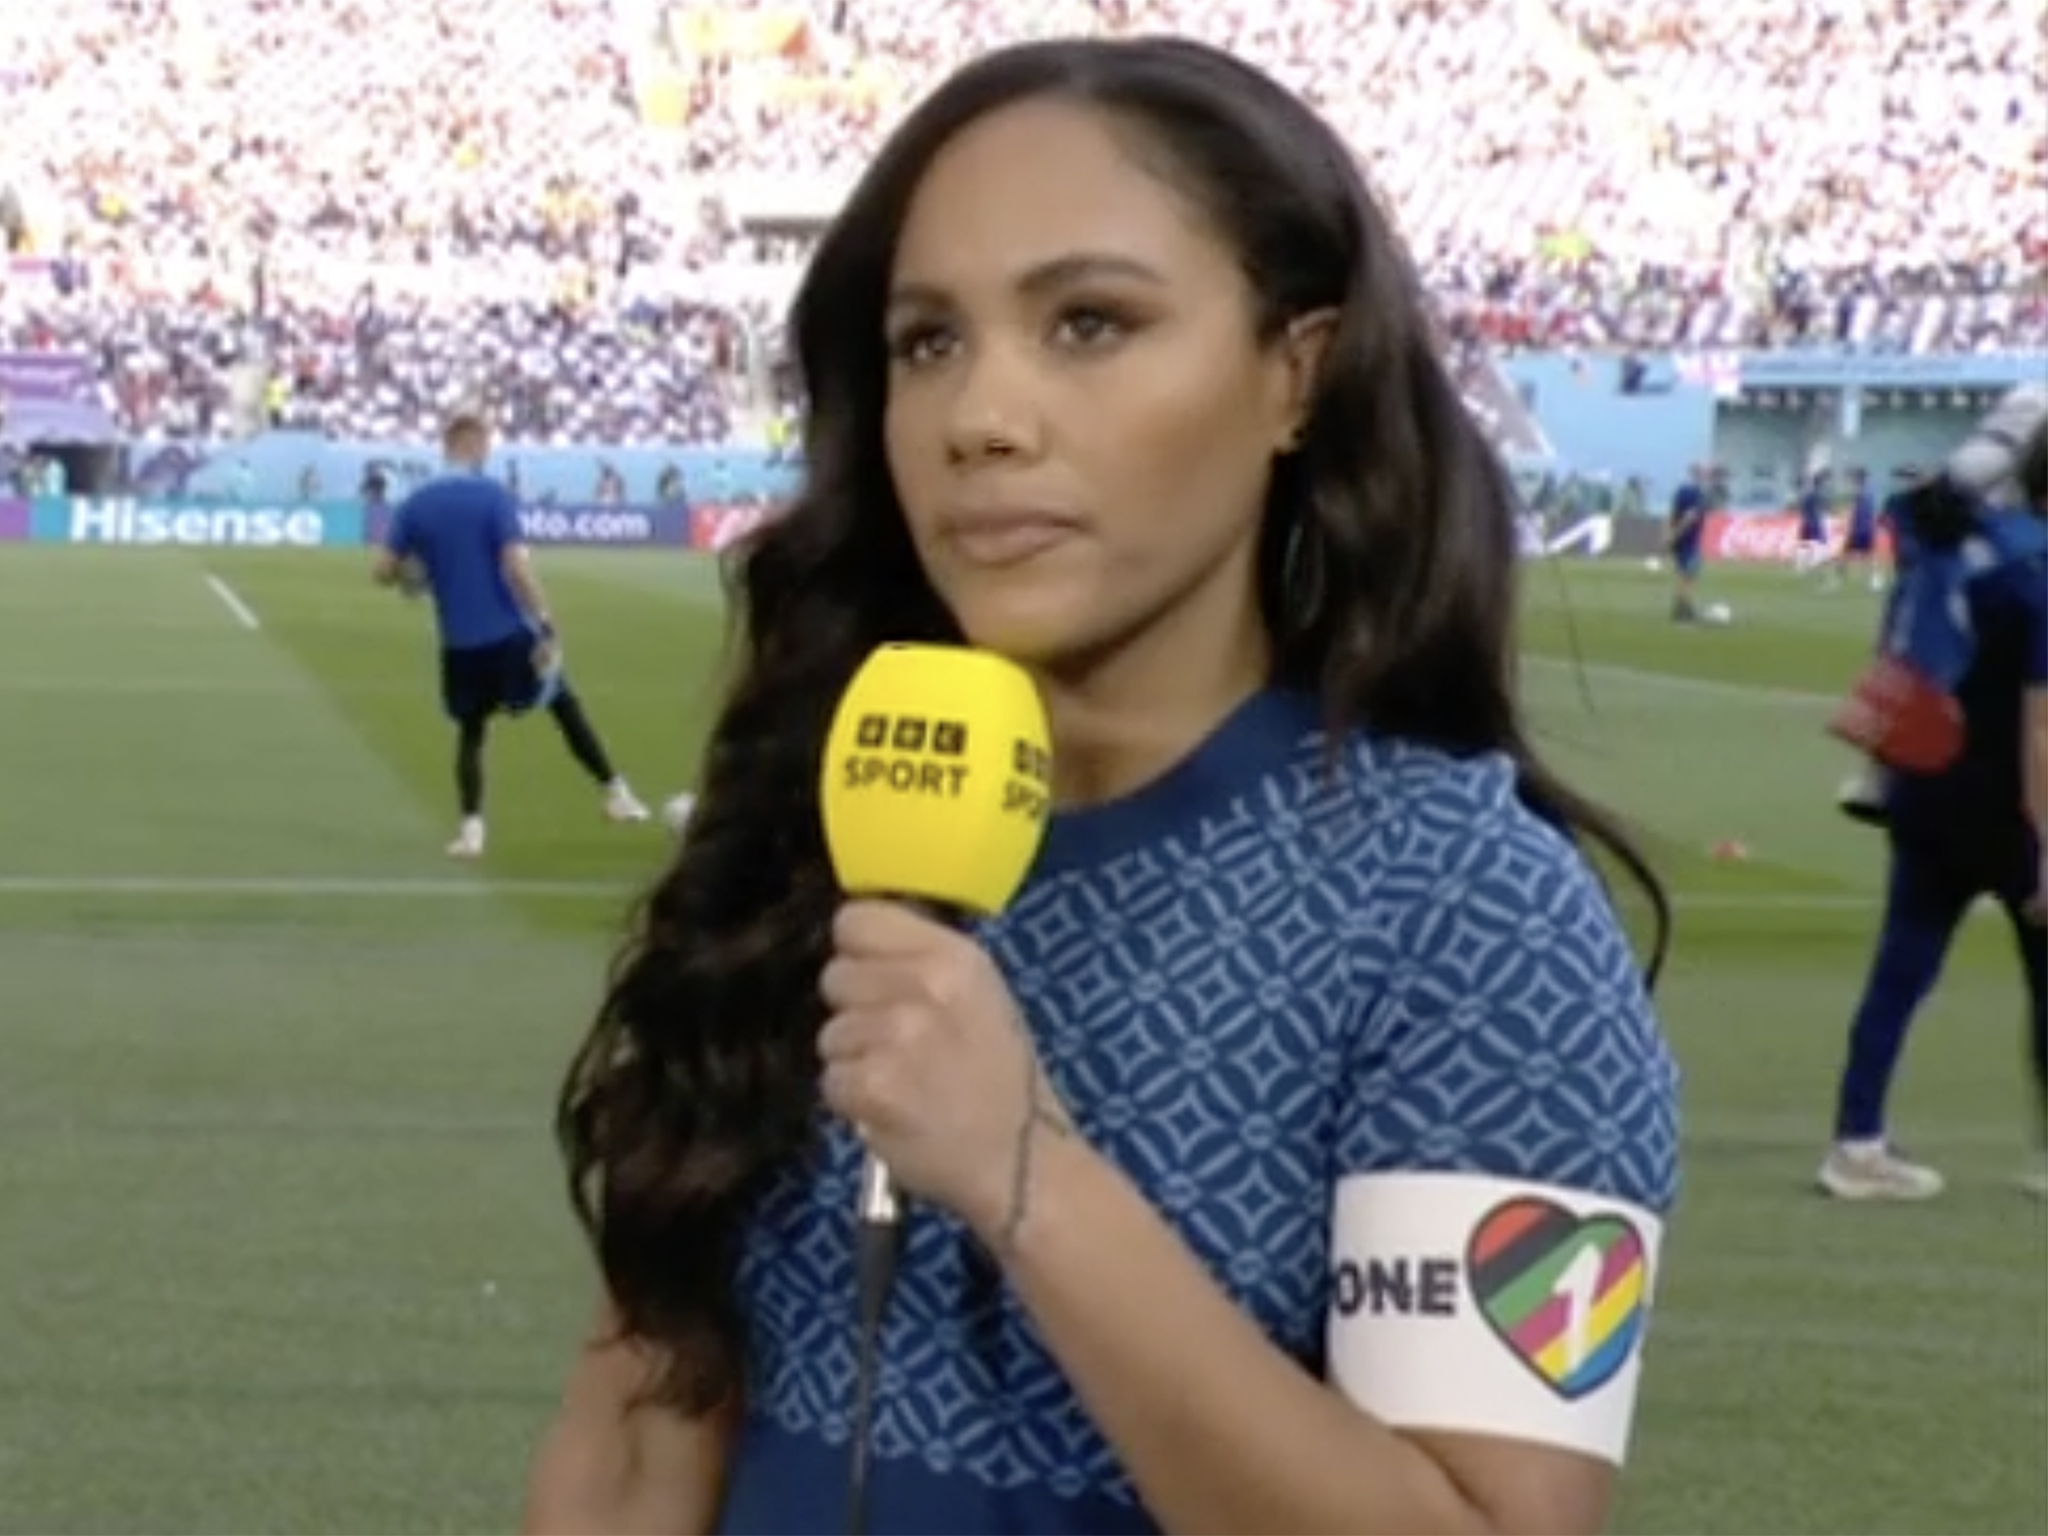 Alex Scott wears OneLove armband on BBC coverage of England vs Iran The Independent